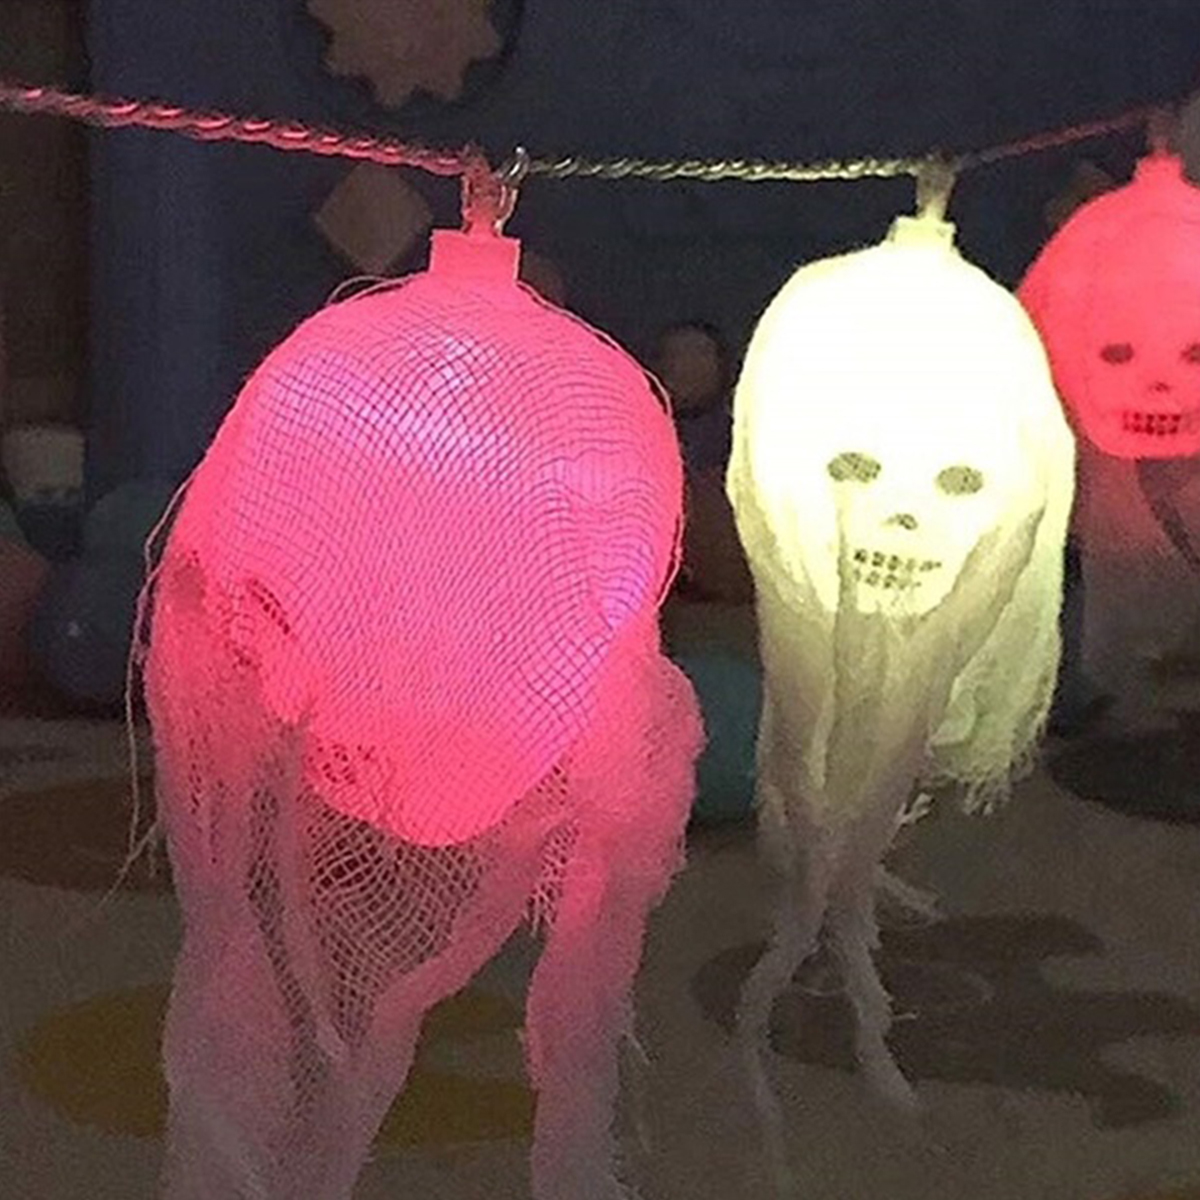 25M-Battery-Powered-10-LED-Skull-String-Light-Decoration-Lamp-for-Halloween-Ghost-Party-Decor-1549748-4